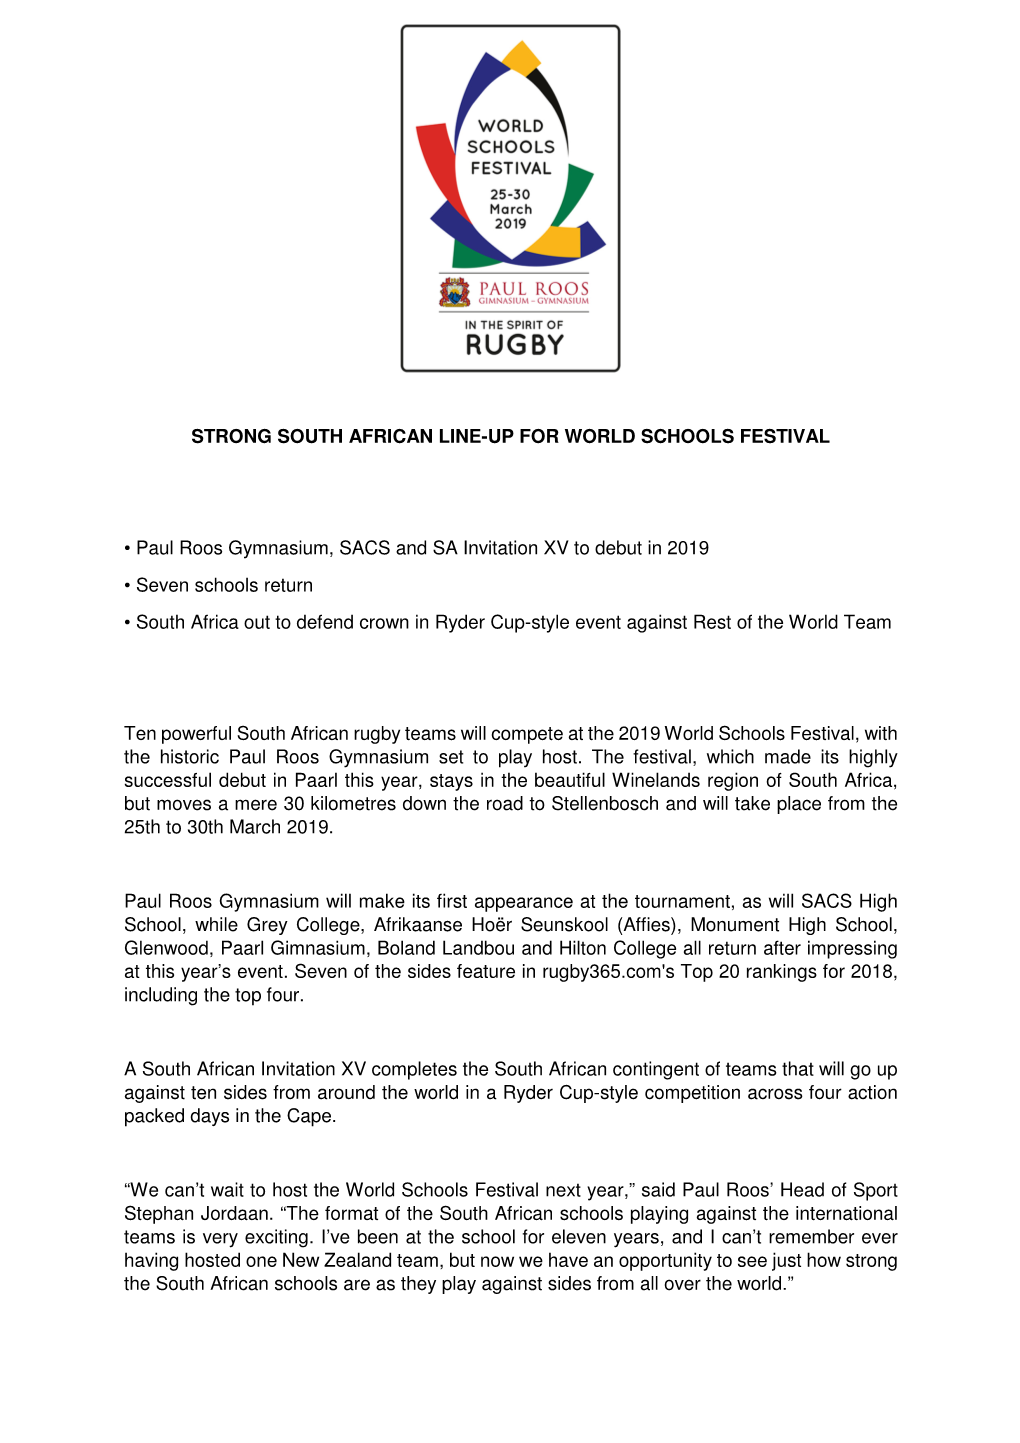 Strong South African Line-Up for World Schools Festival